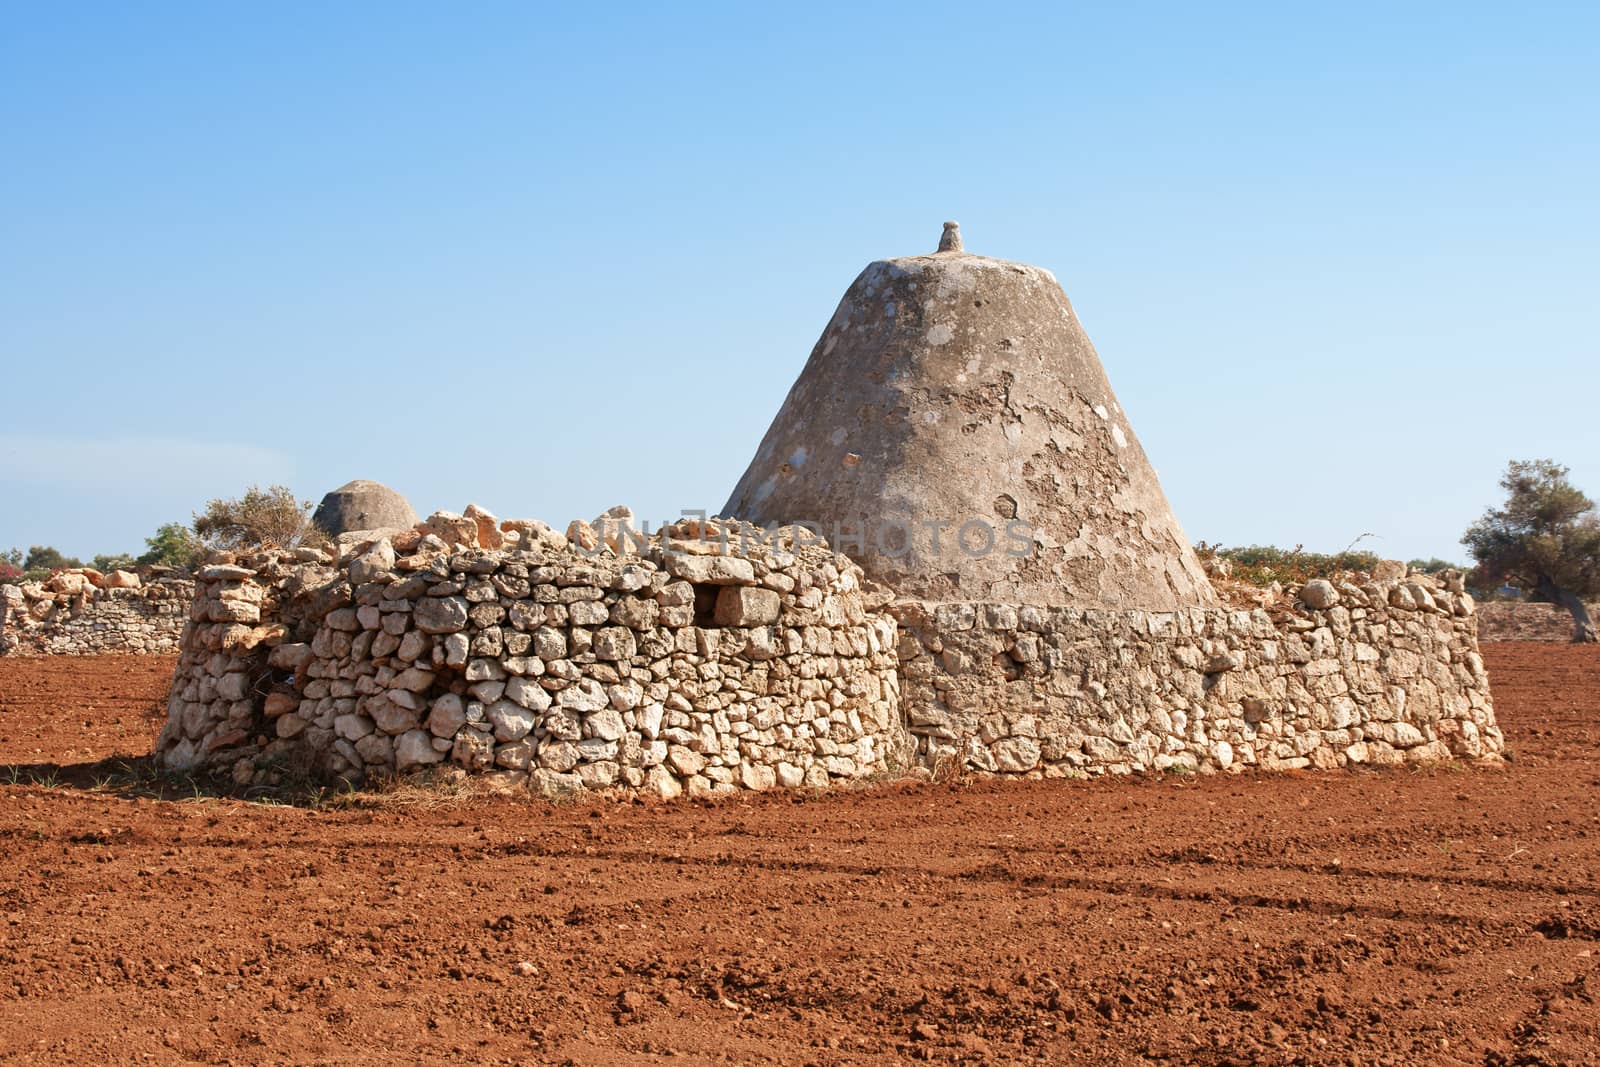 Ancient Trulli houses in Apulia with conical roofs made of lapidary stones. These rural constructions were built in the country along the sea.